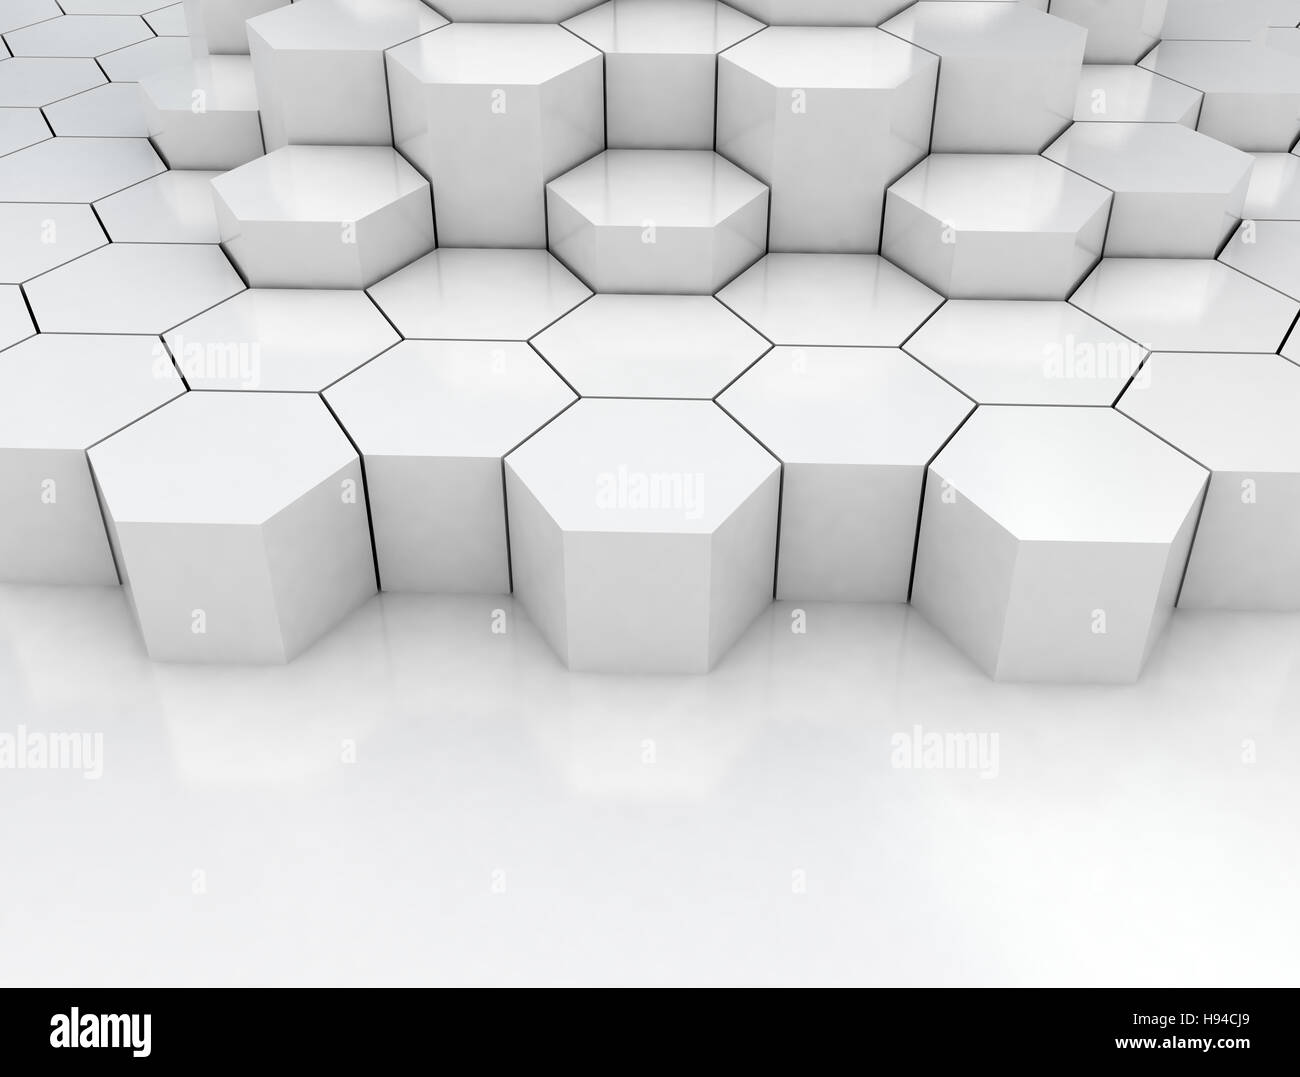 Hexagonal abstract 3d background Stock Photo